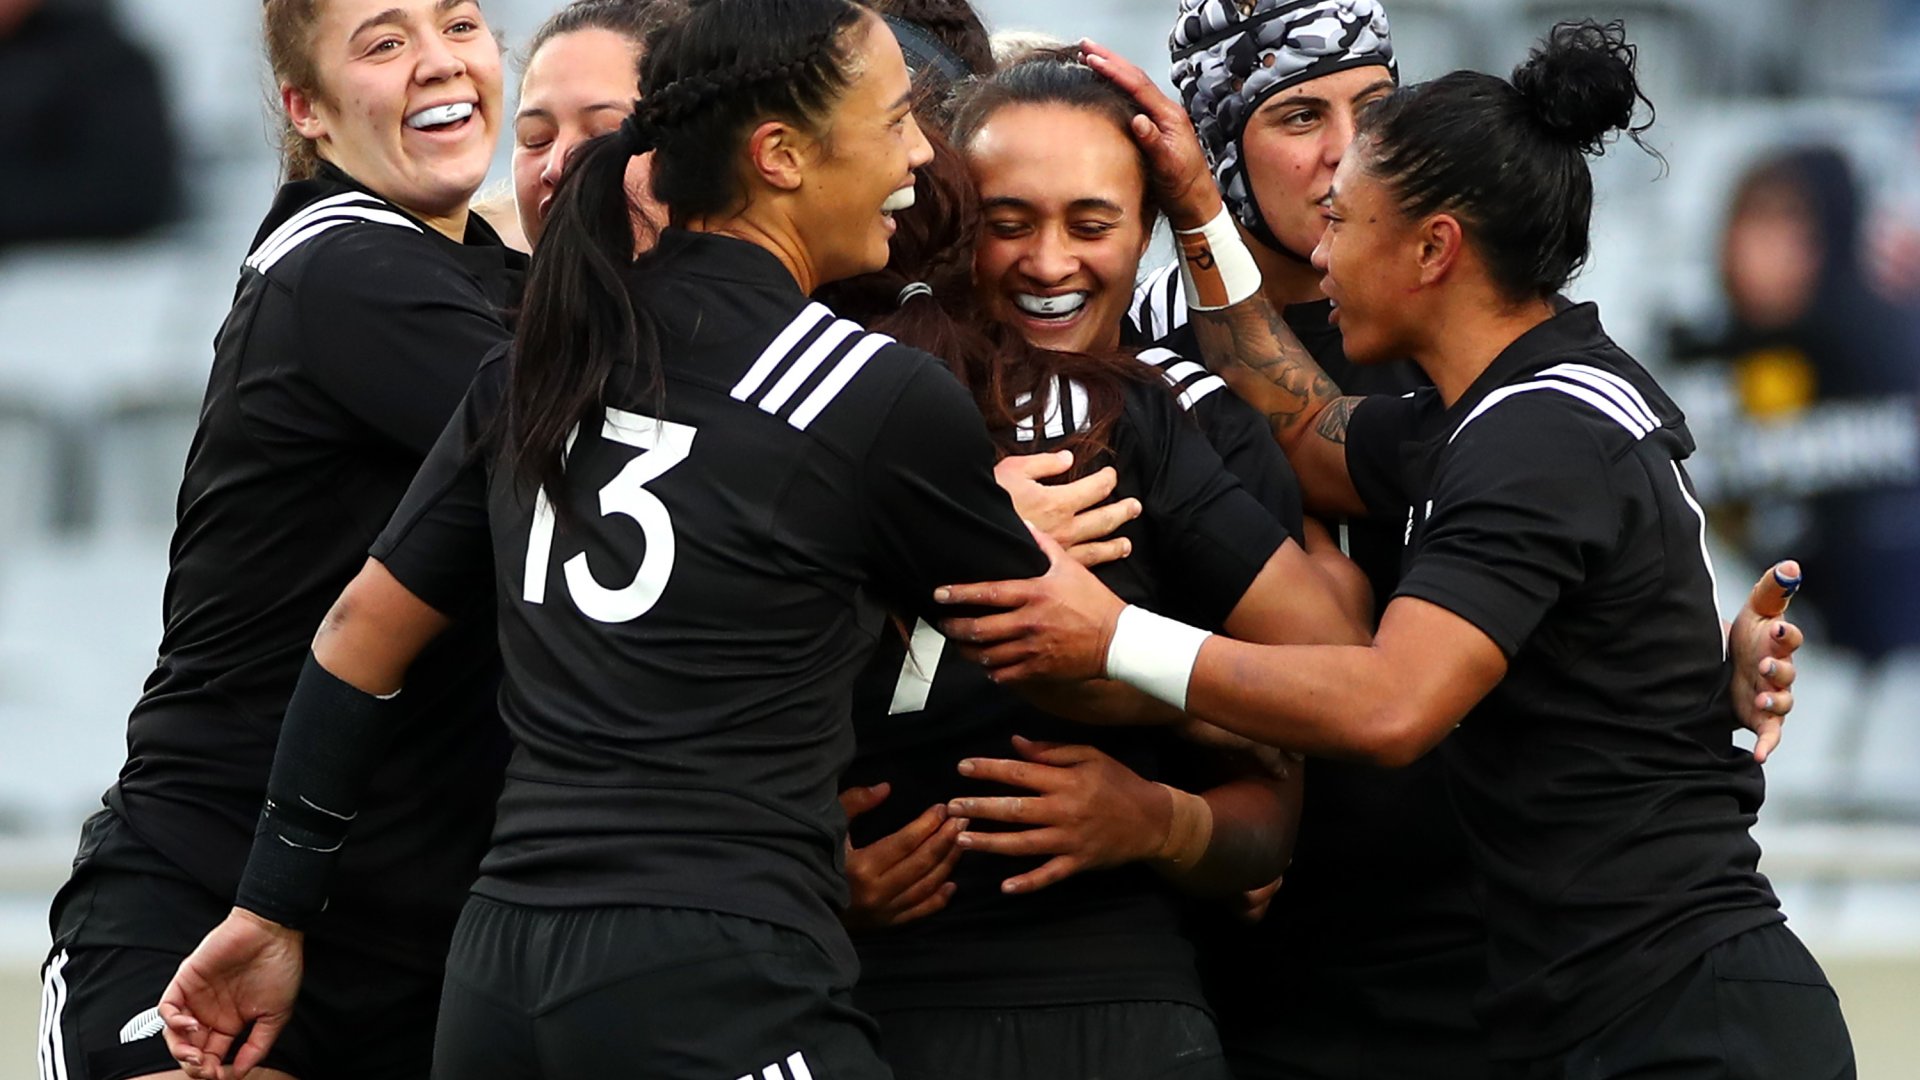 Actionpacked week ahead as New Zealand Black Ferns women's rugby team